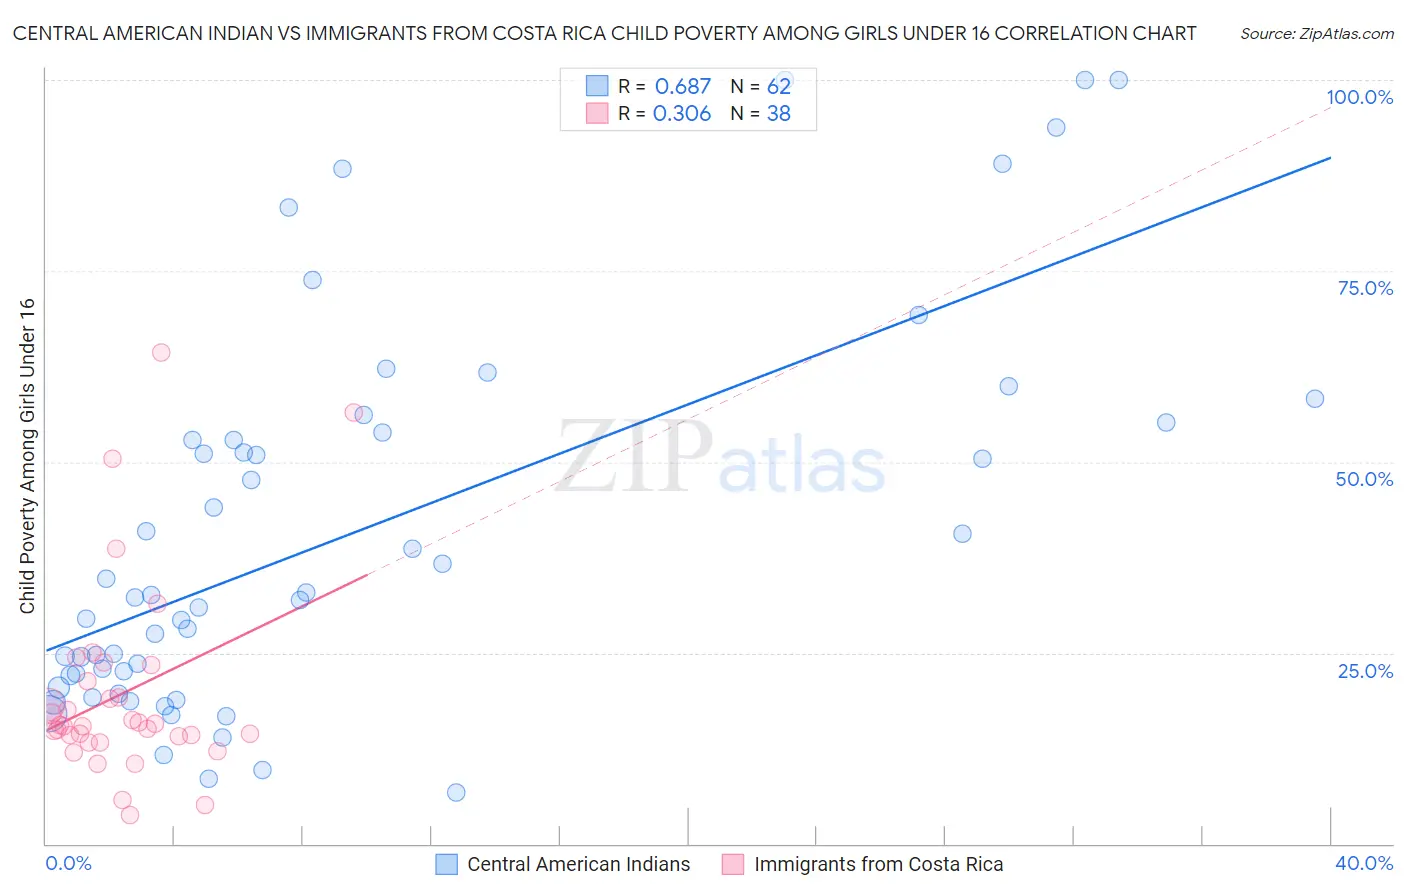 Central American Indian vs Immigrants from Costa Rica Child Poverty Among Girls Under 16